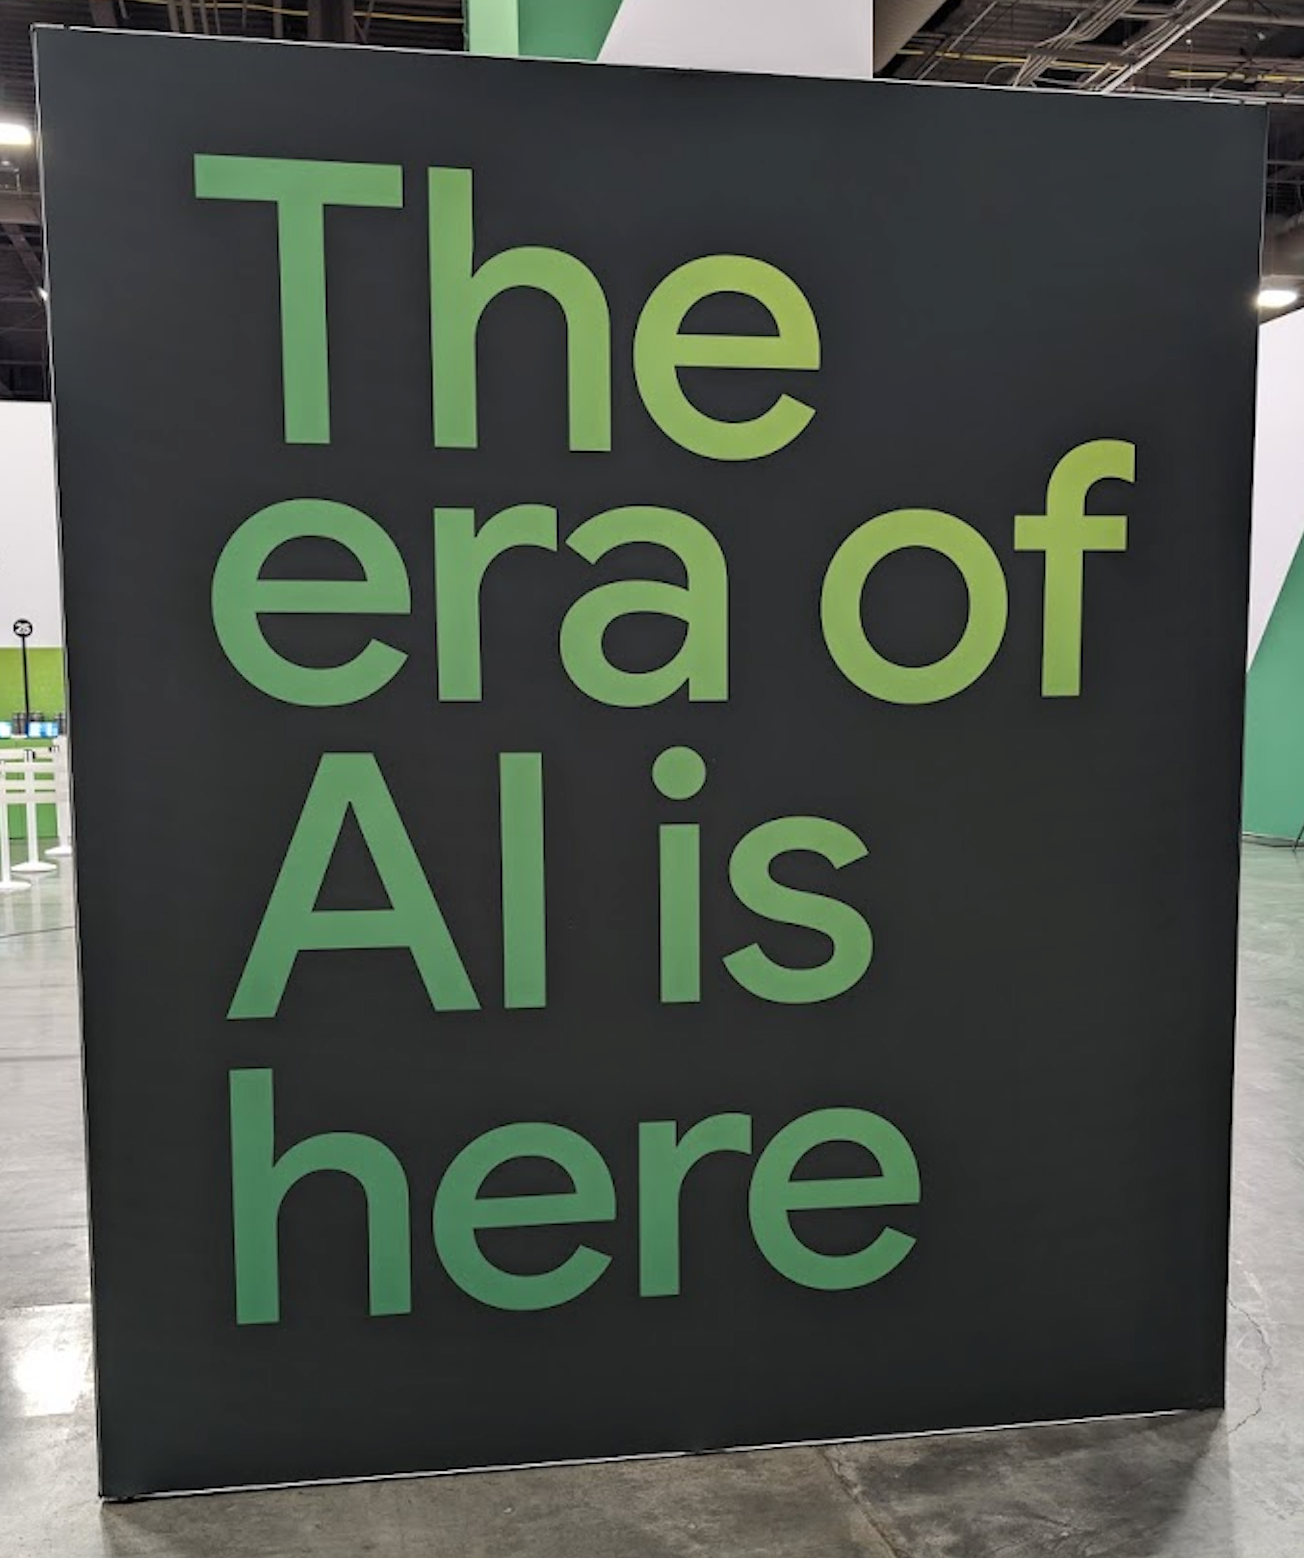 A sign saying "The era of AI is here"